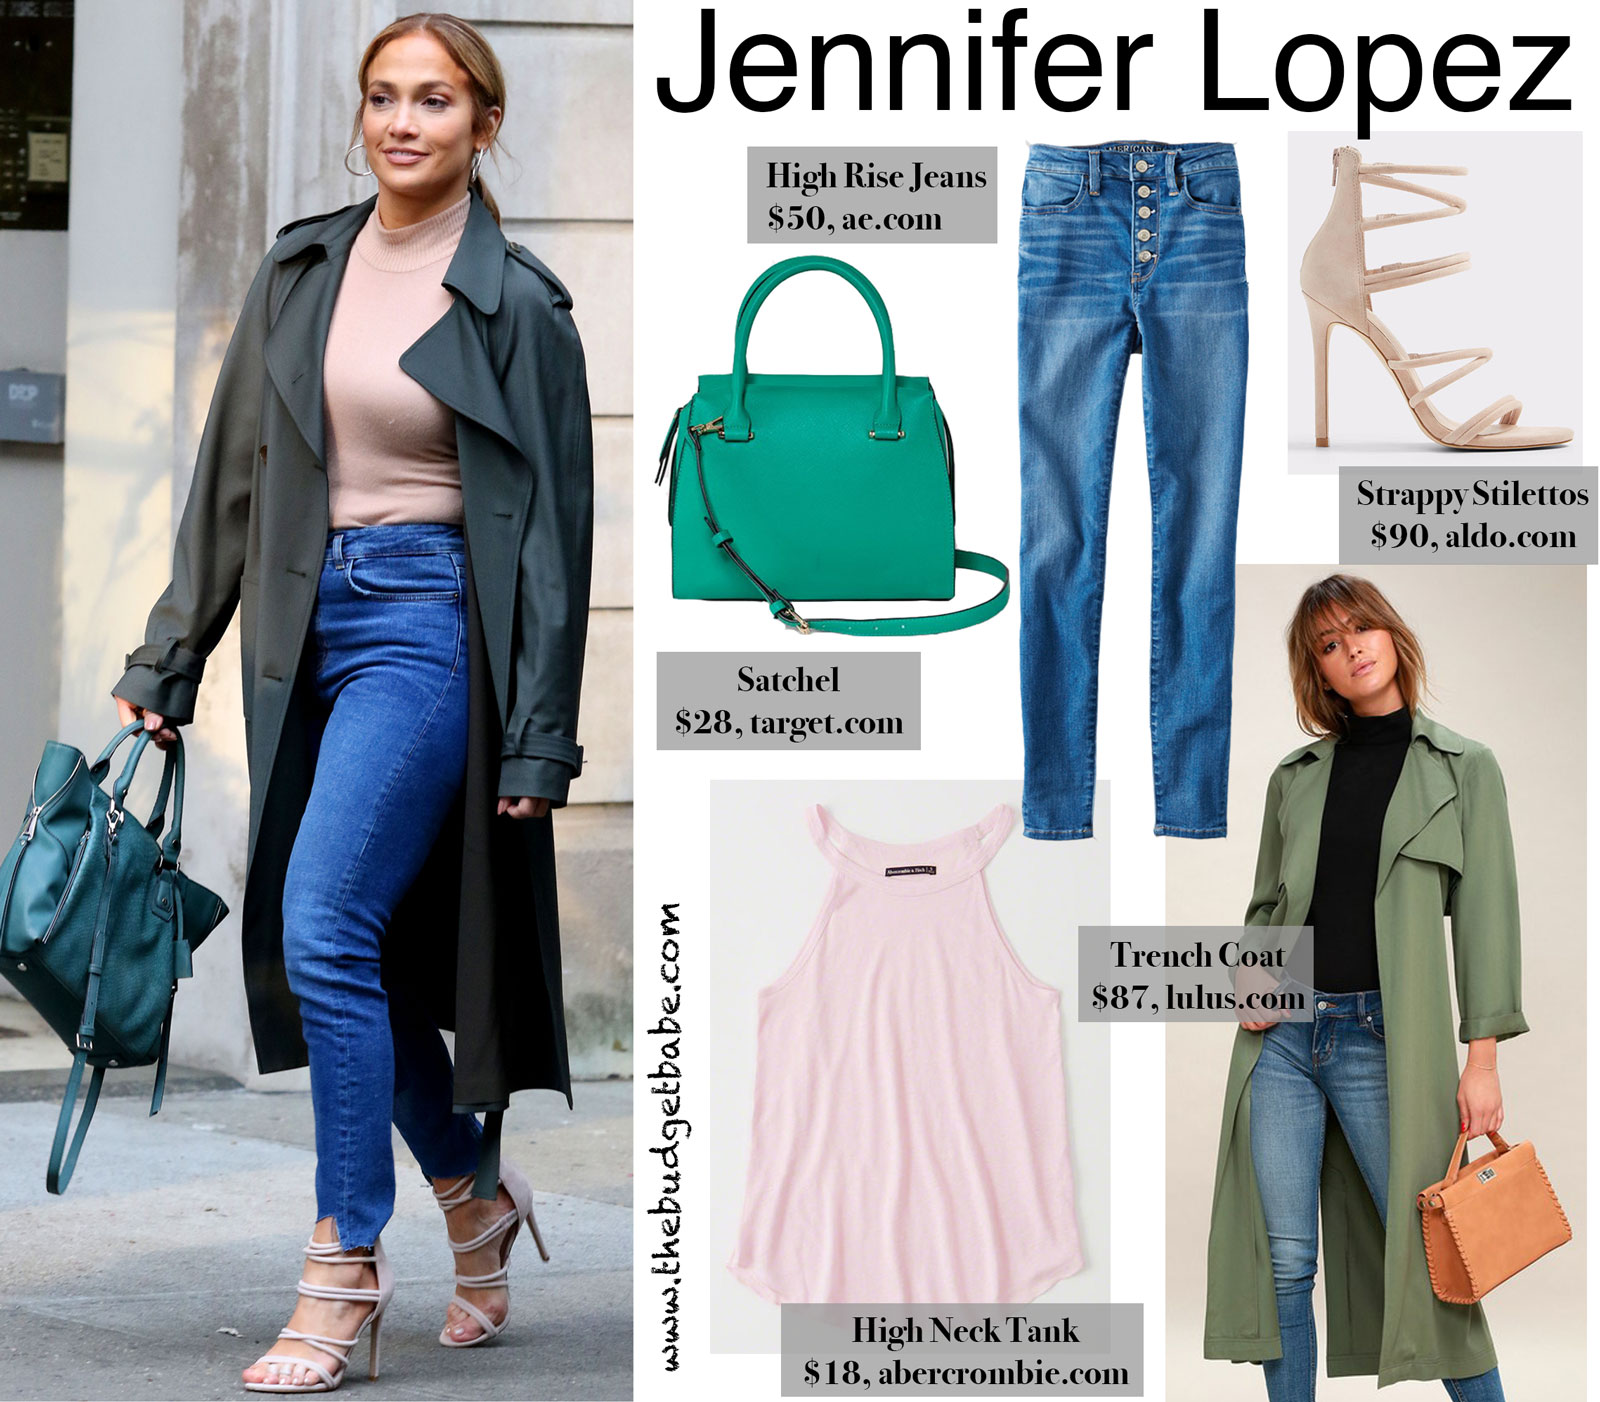 Jennifer Lopez Green Trench Coat and Satchel Look for Less